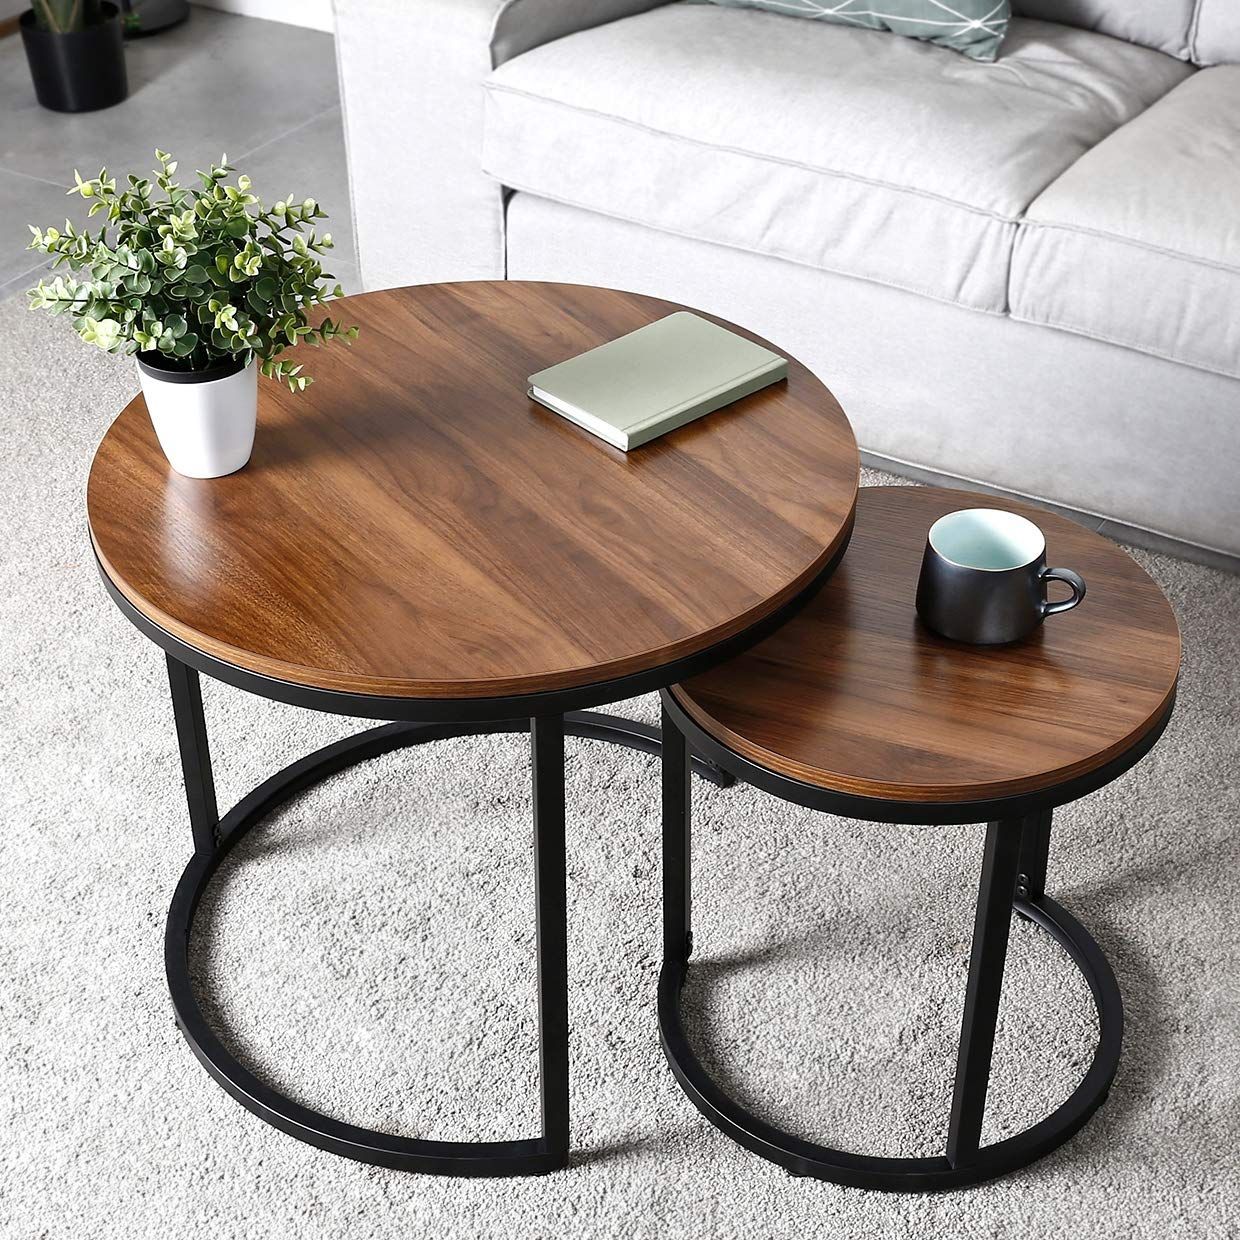 Amazonsmile: Amzdeal Coffee Table For Living Room, Set Of With 2 Piece Round Coffee Tables Set (View 13 of 15)